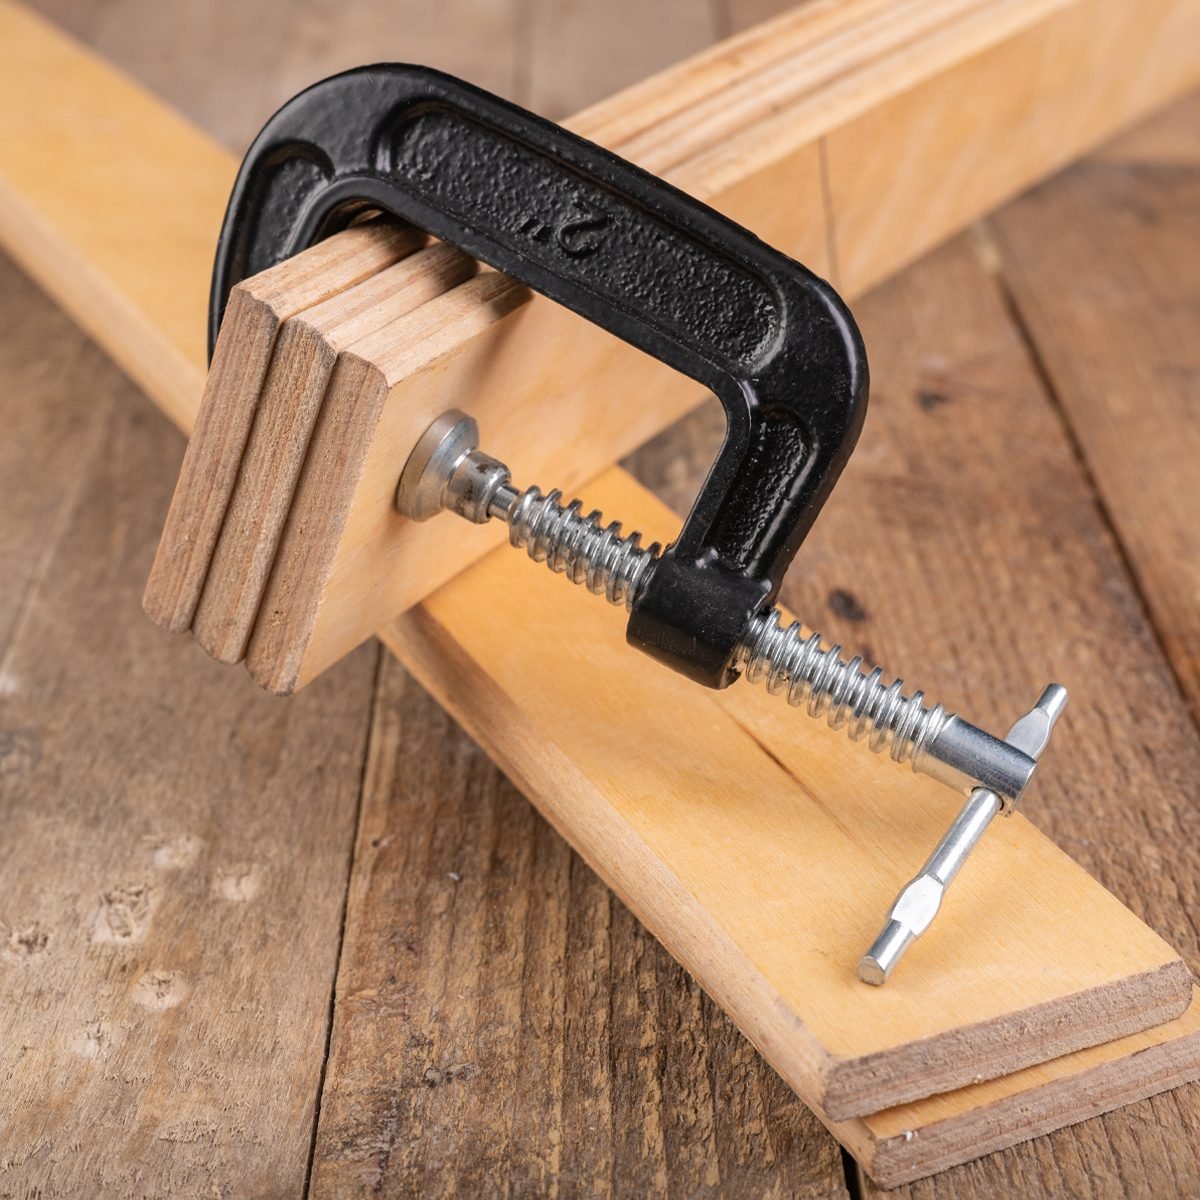 Wooden Hand Screw Clamp: Enhance your Woodworking Skills with this Must-Have Tool